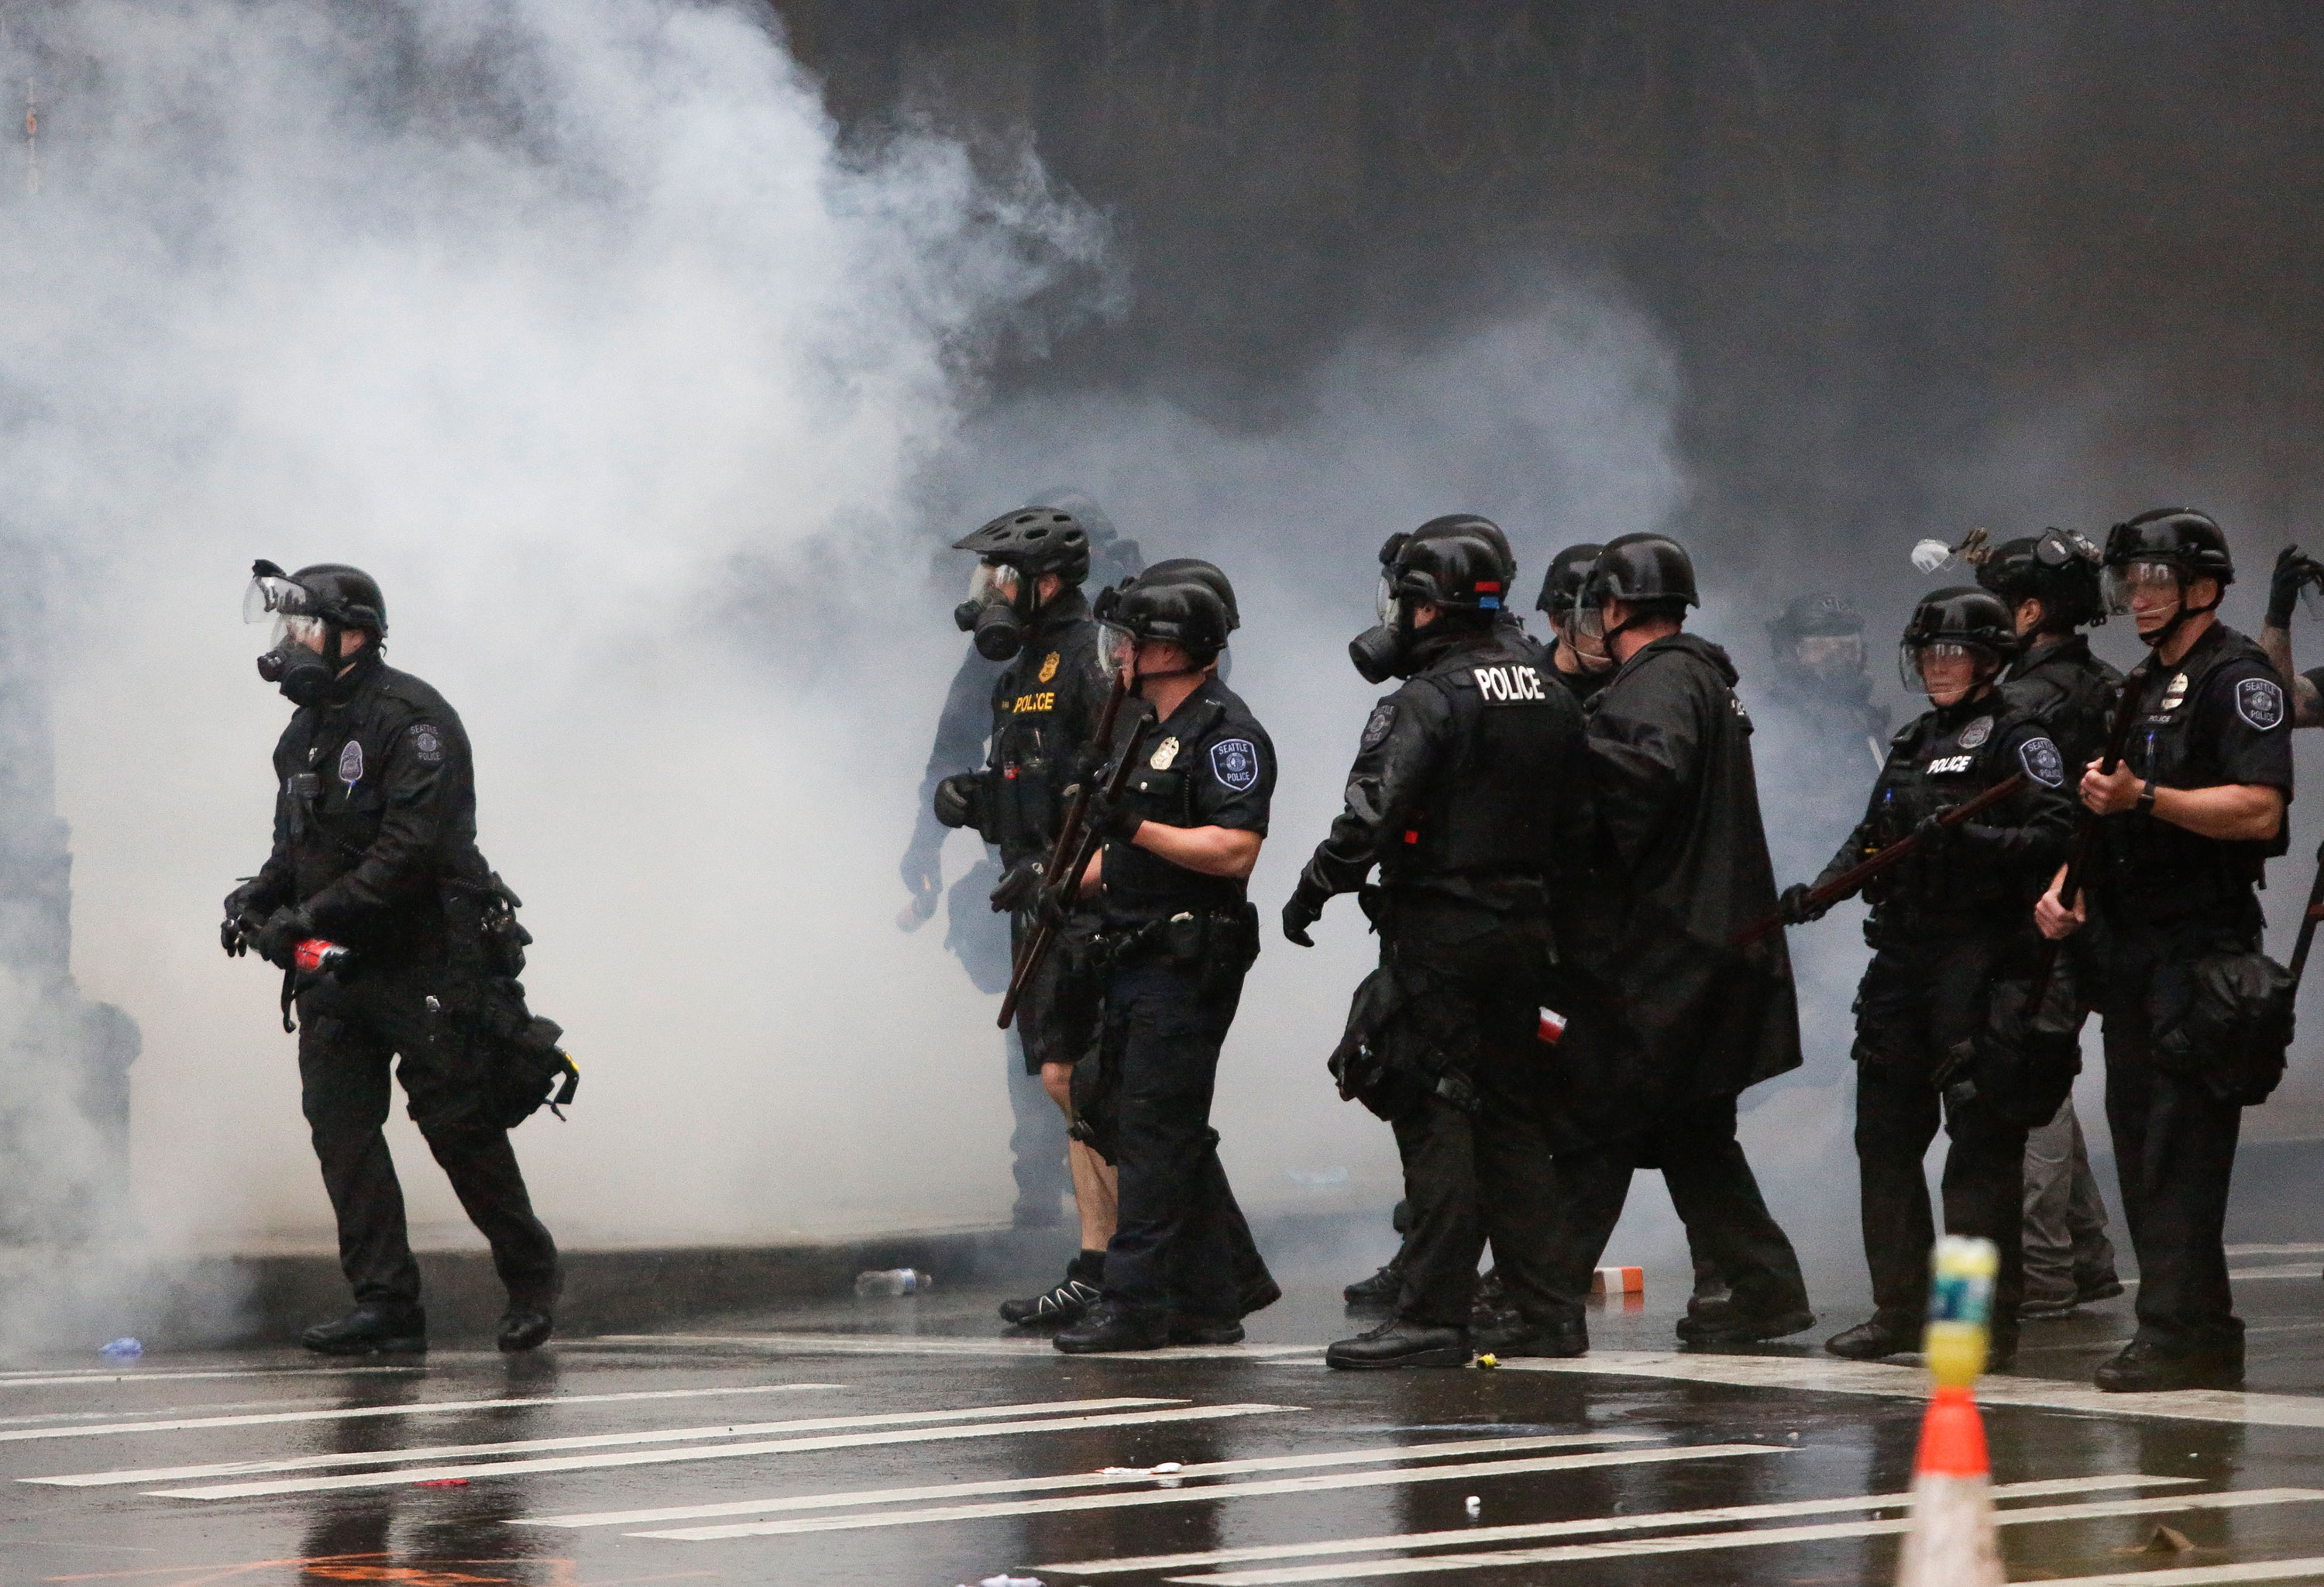 Police use tear gas during protests on May 30 in Seattle.